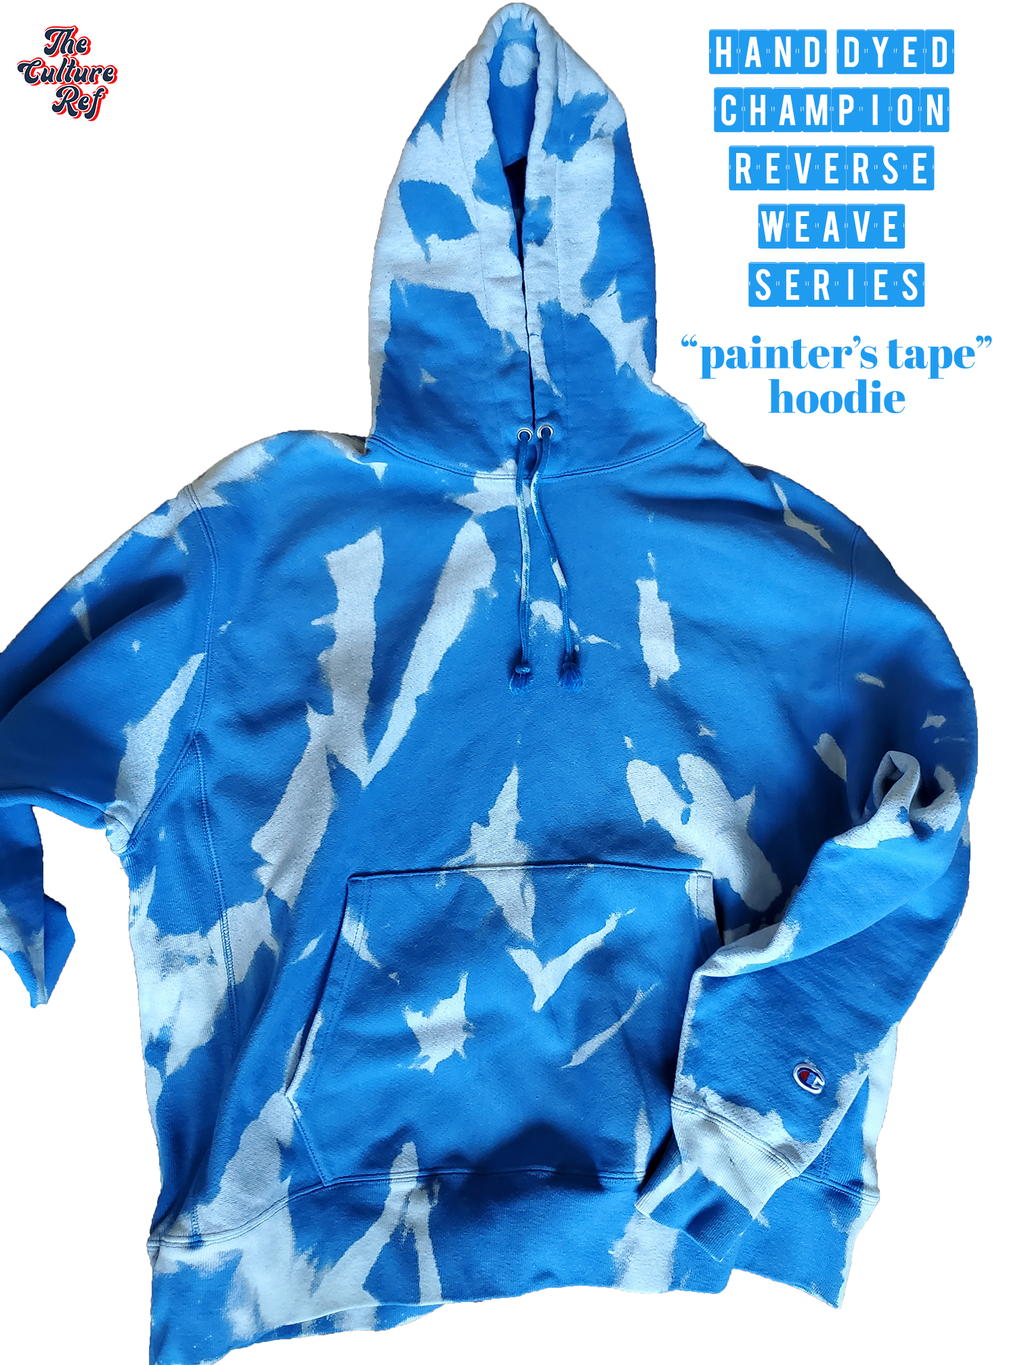 Painter's Tape Blue Tie Dye Hoodie - Champion Reverse Weave | The Culture Ref Official Tie Dye Limited Series